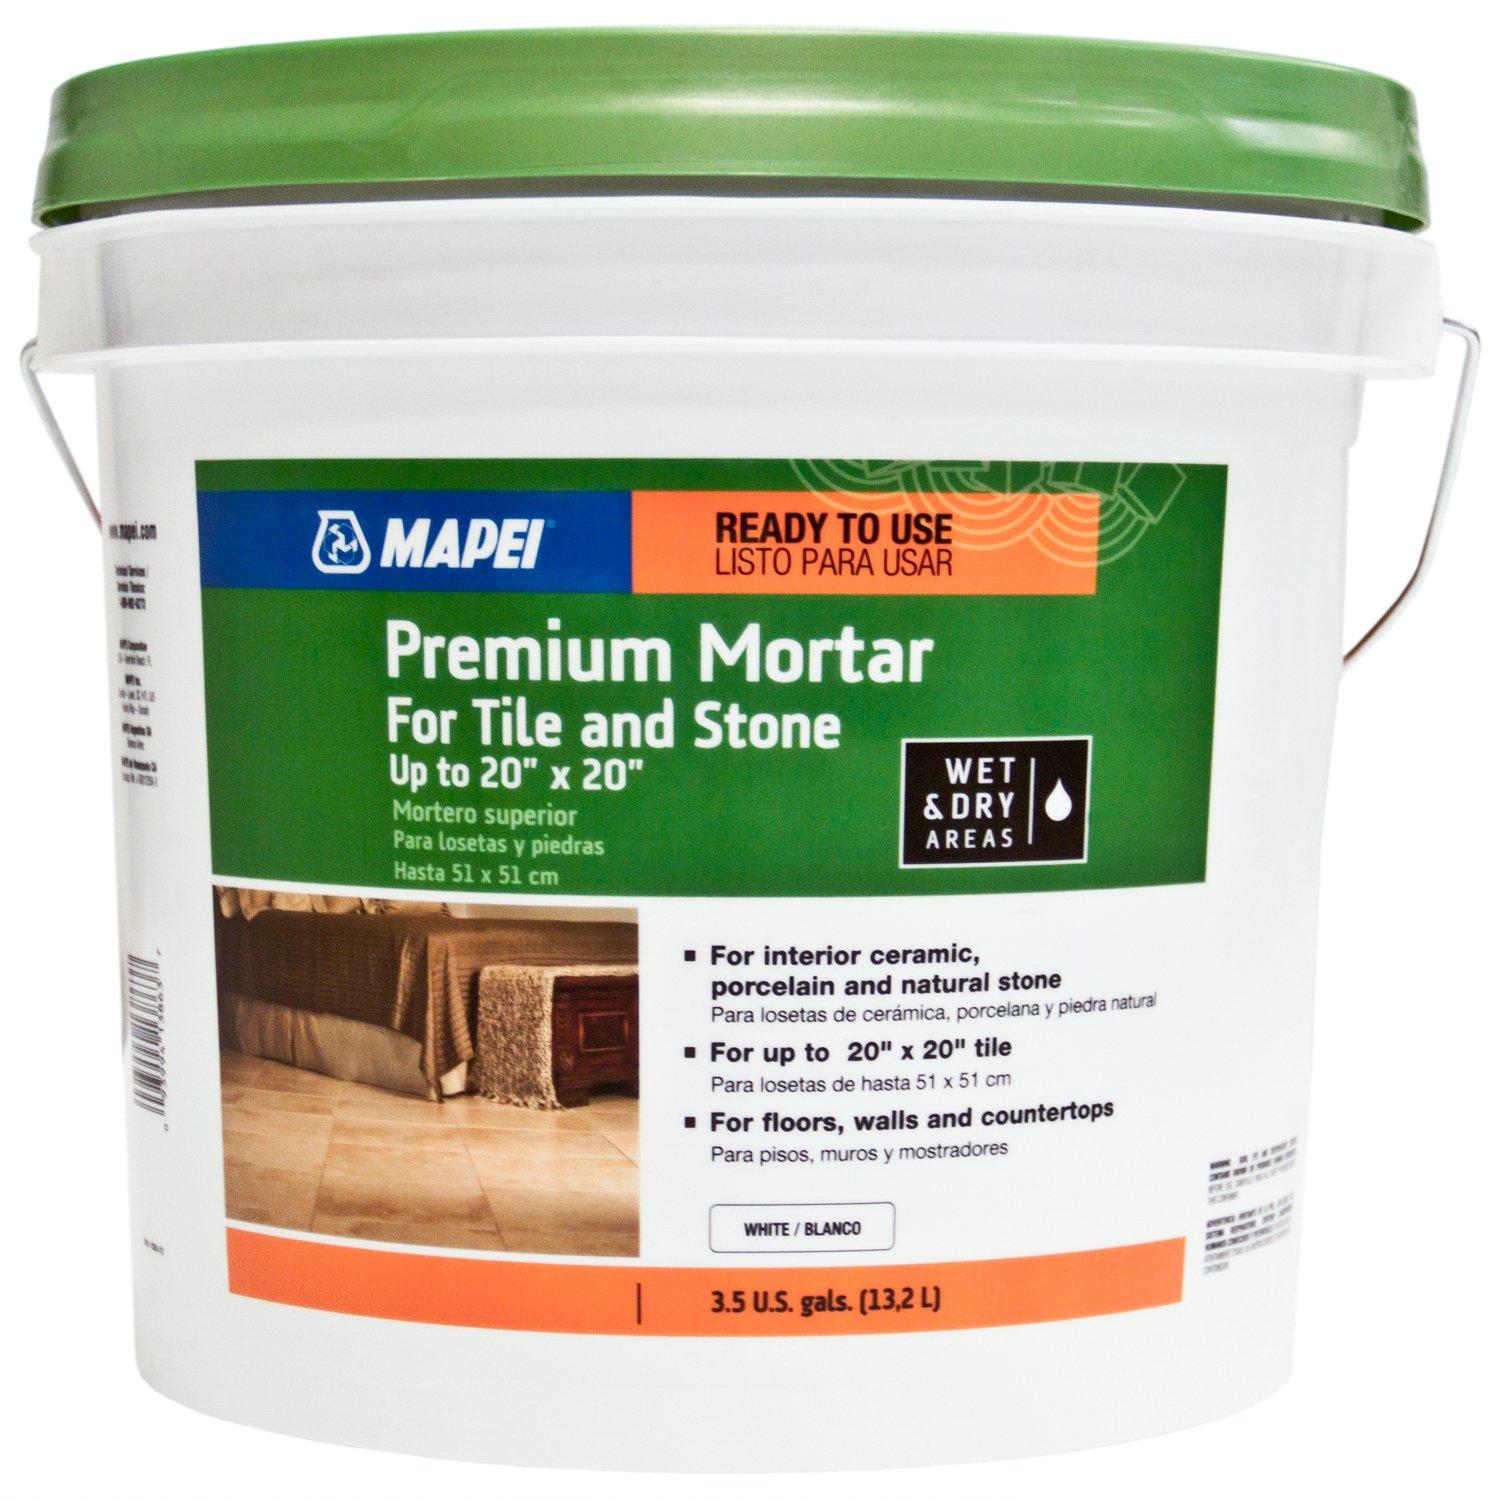 Mapei 02 Pewter Kerapoxy Cq Premium Epoxy Grout And Mortar 1 Gal